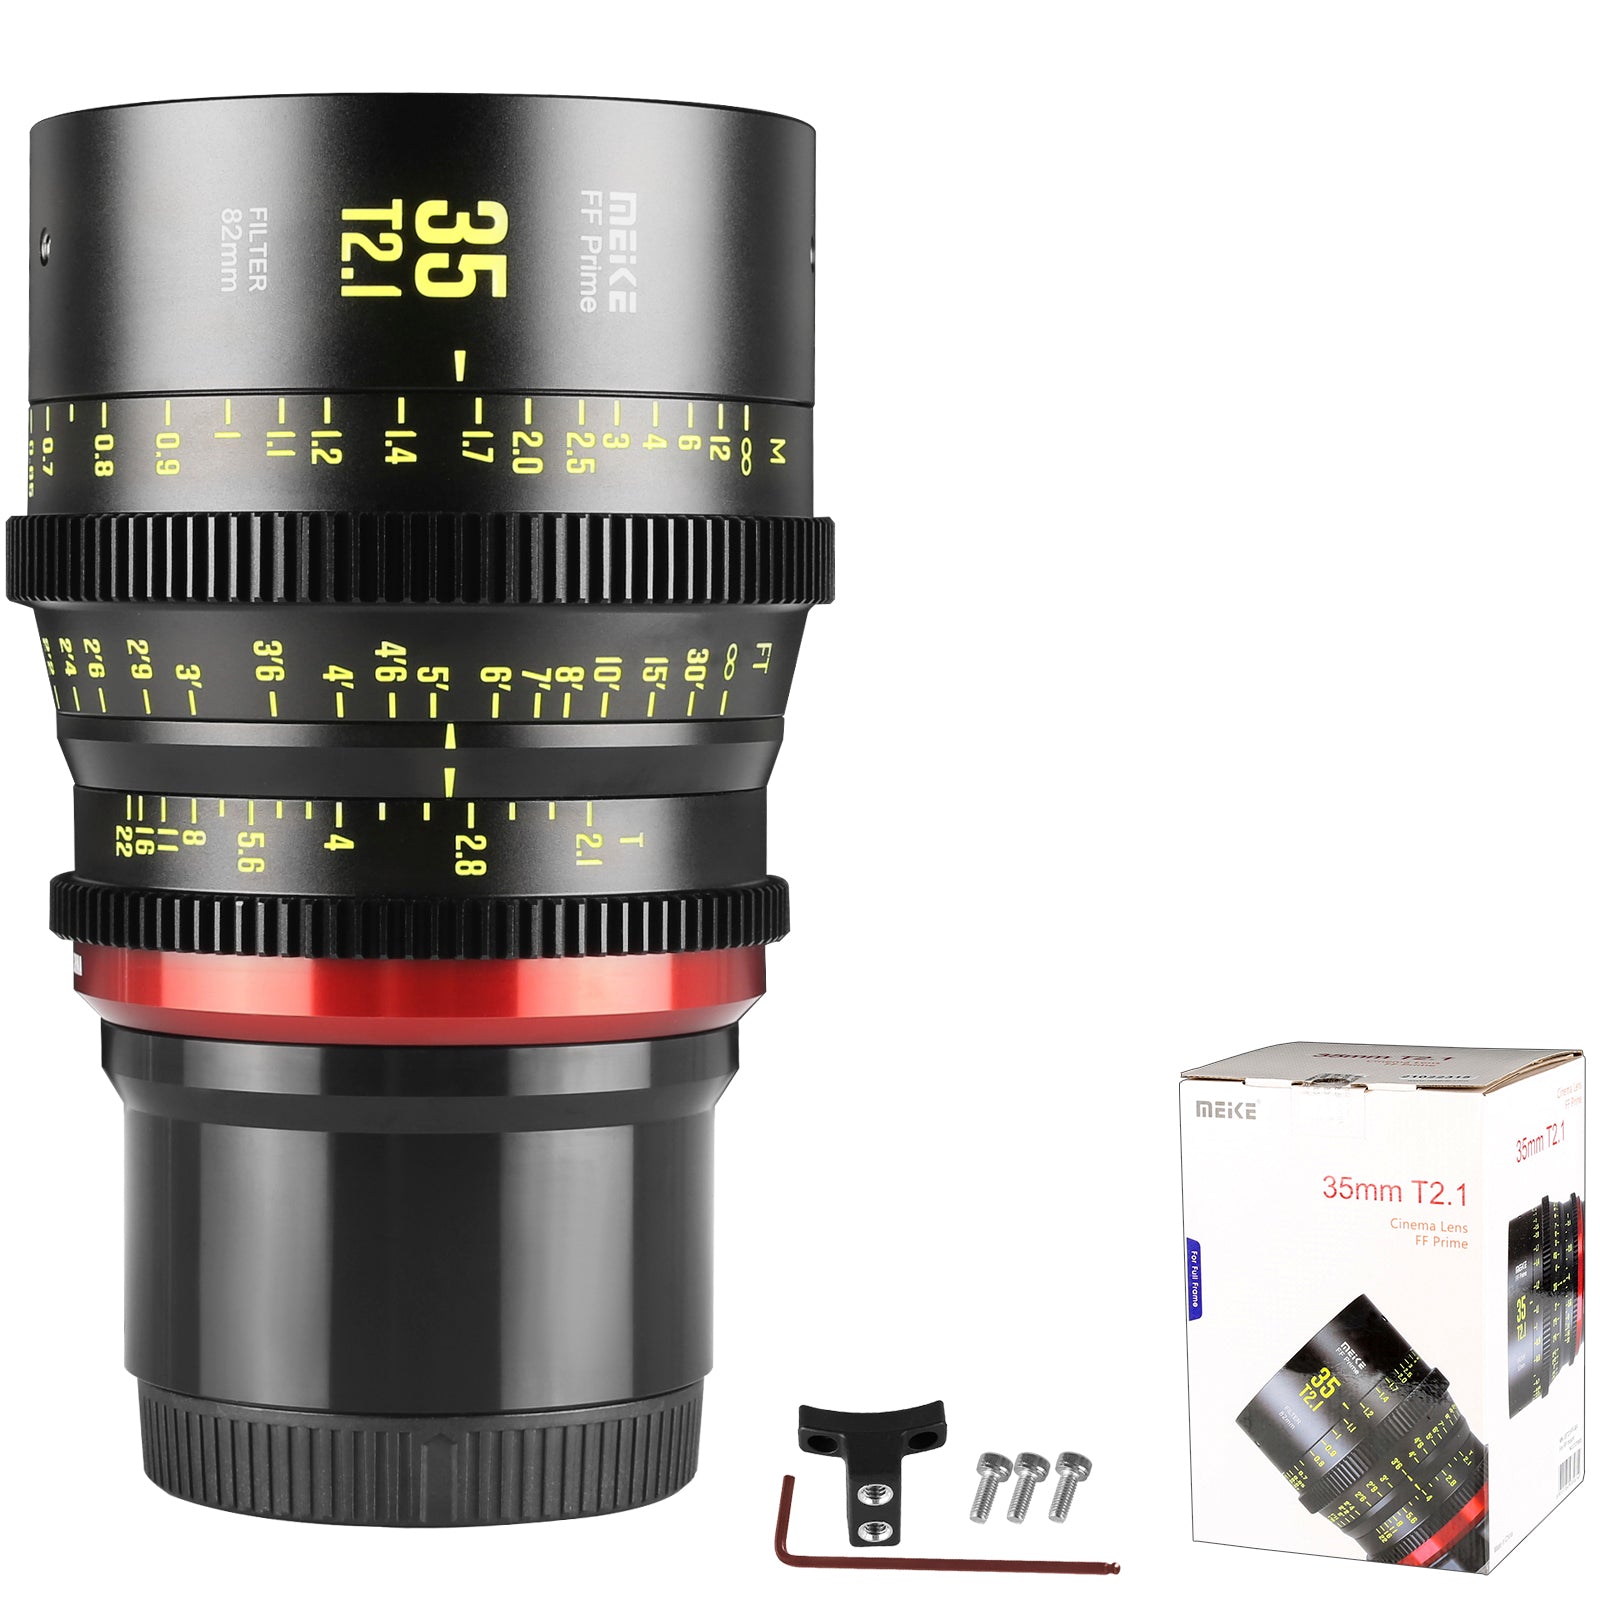 Meike Cinema Full Frame Cinema Prime 35mm T2.1 Lens (L Mount) with Accessories and a Box